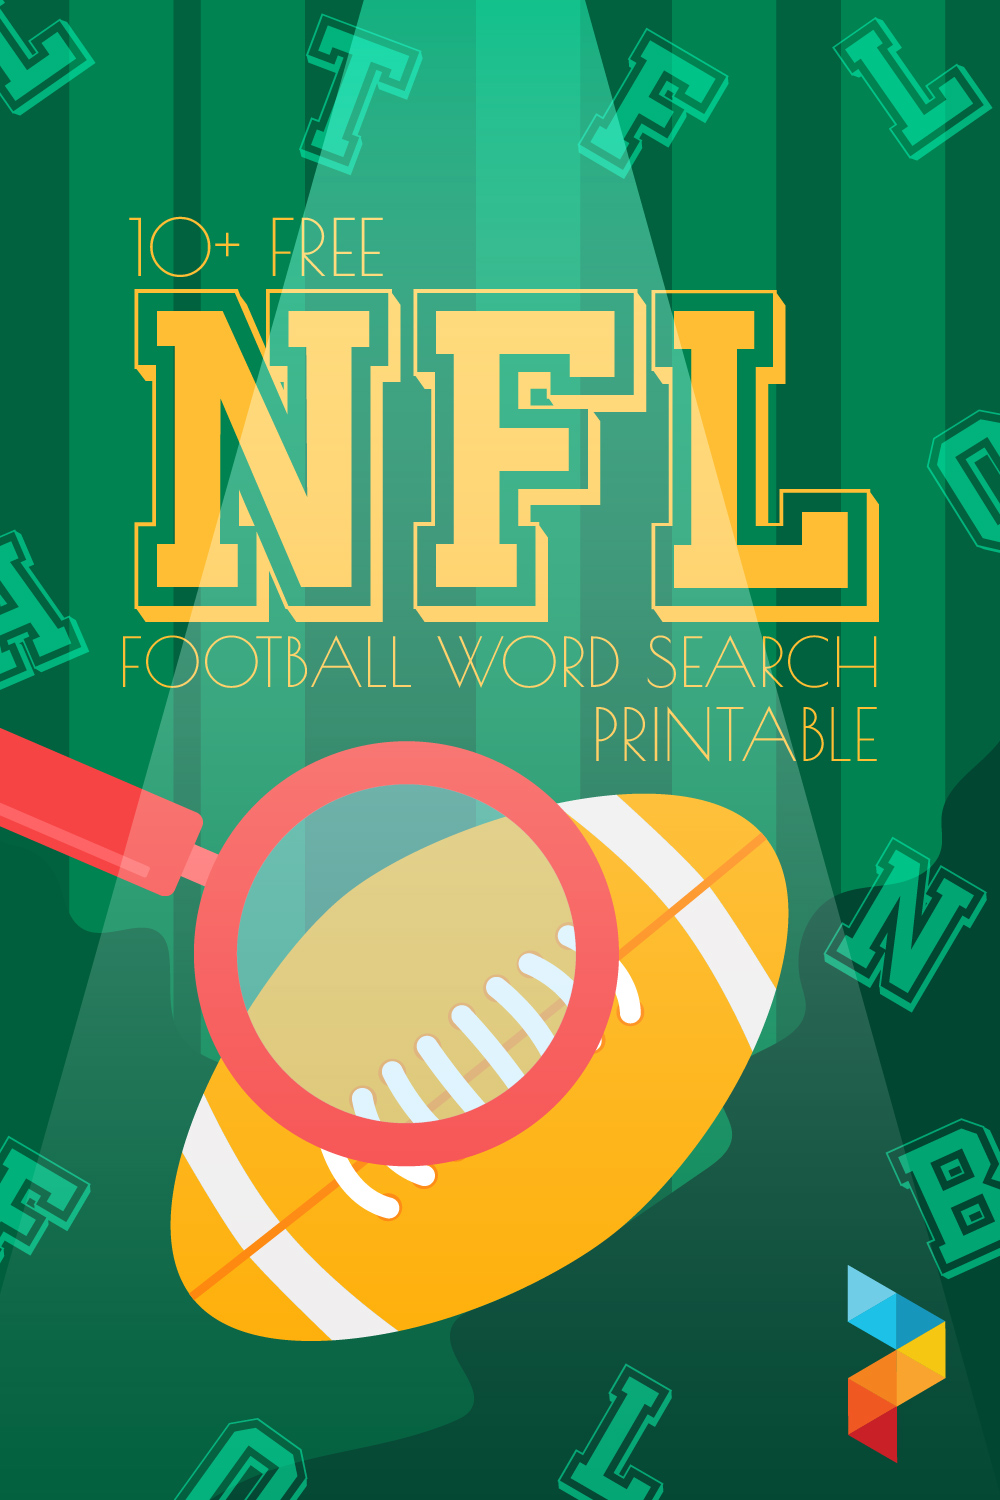 NFL Football Word Search